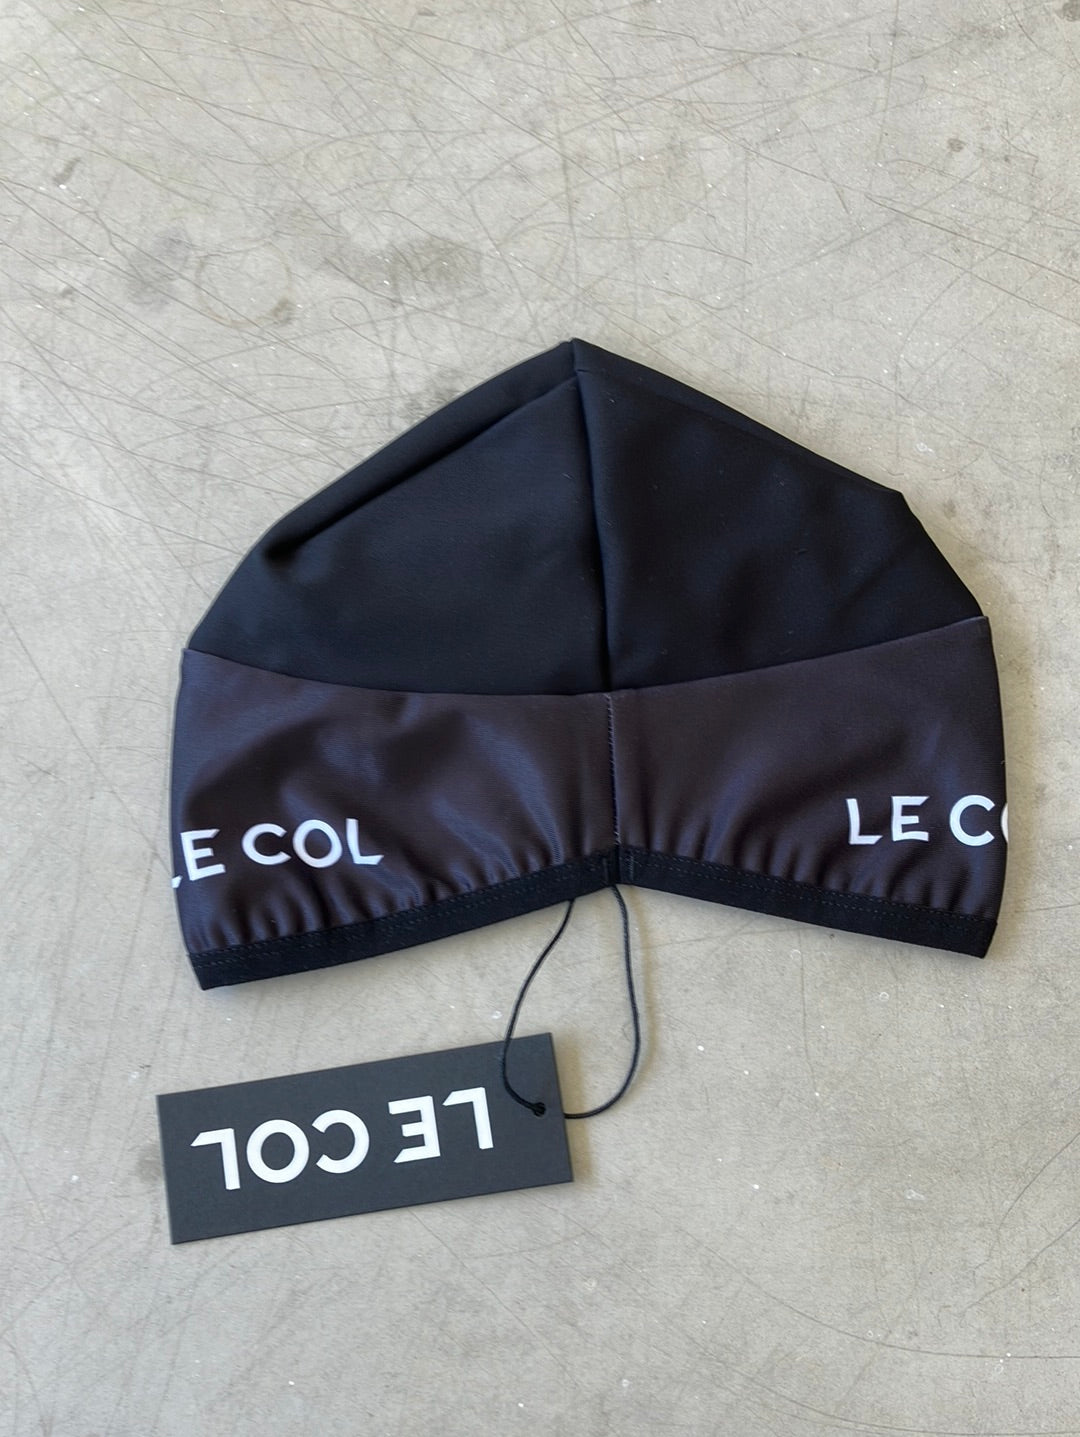 Winter Helmet Liner / Skull Cap / Beanie | Le Col | Bora Hansgrohe | Pro-Issued Cycling Kit